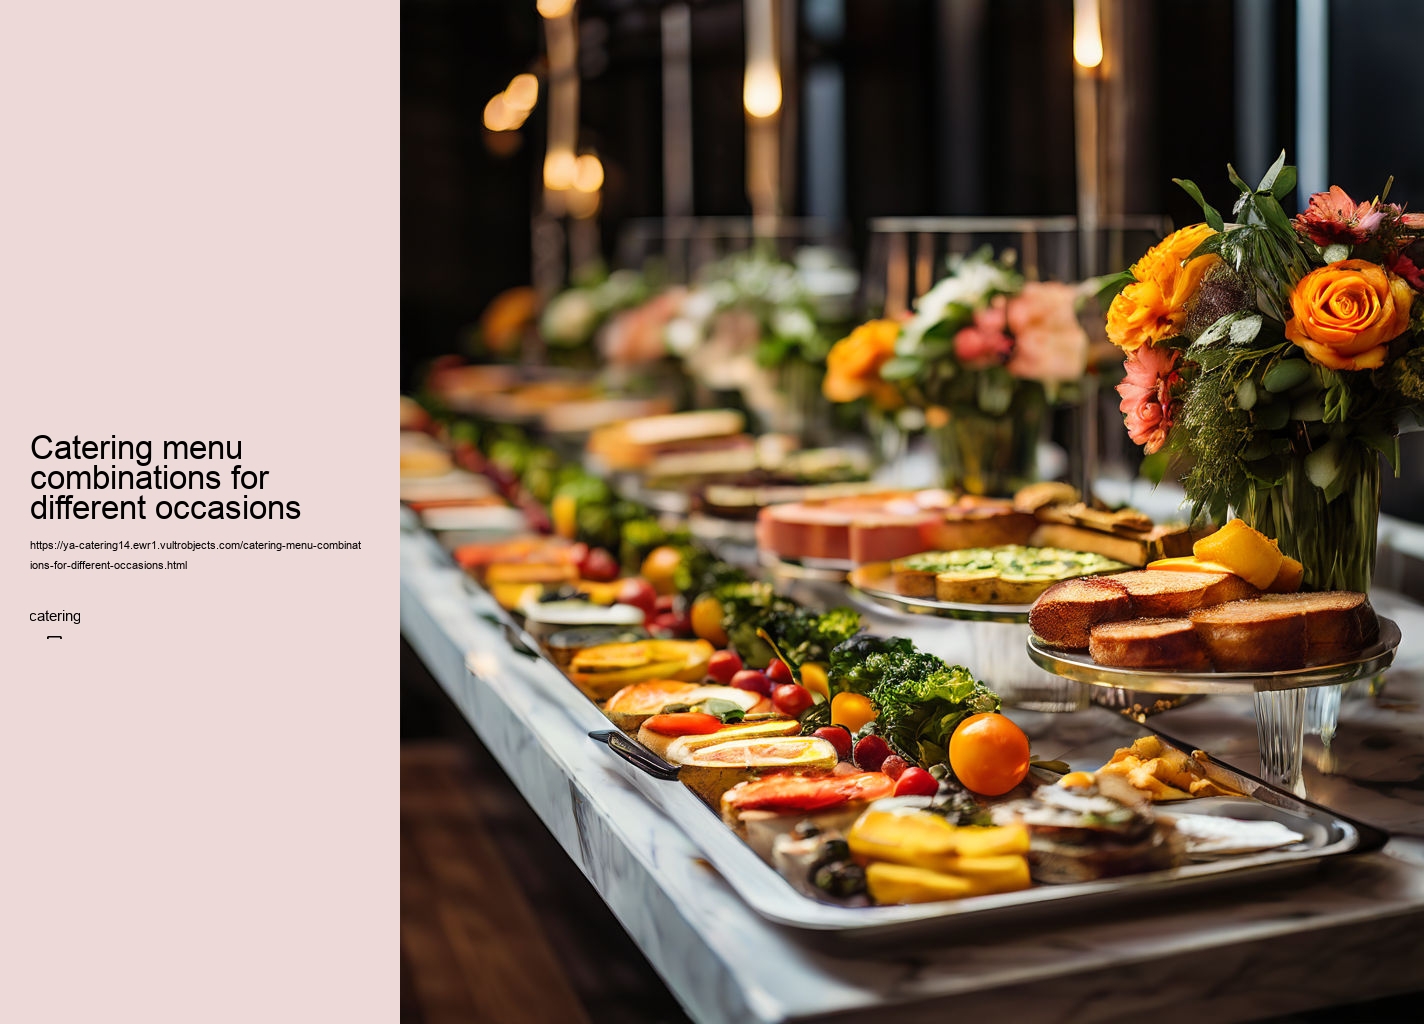 Catering menu combinations for different occasions